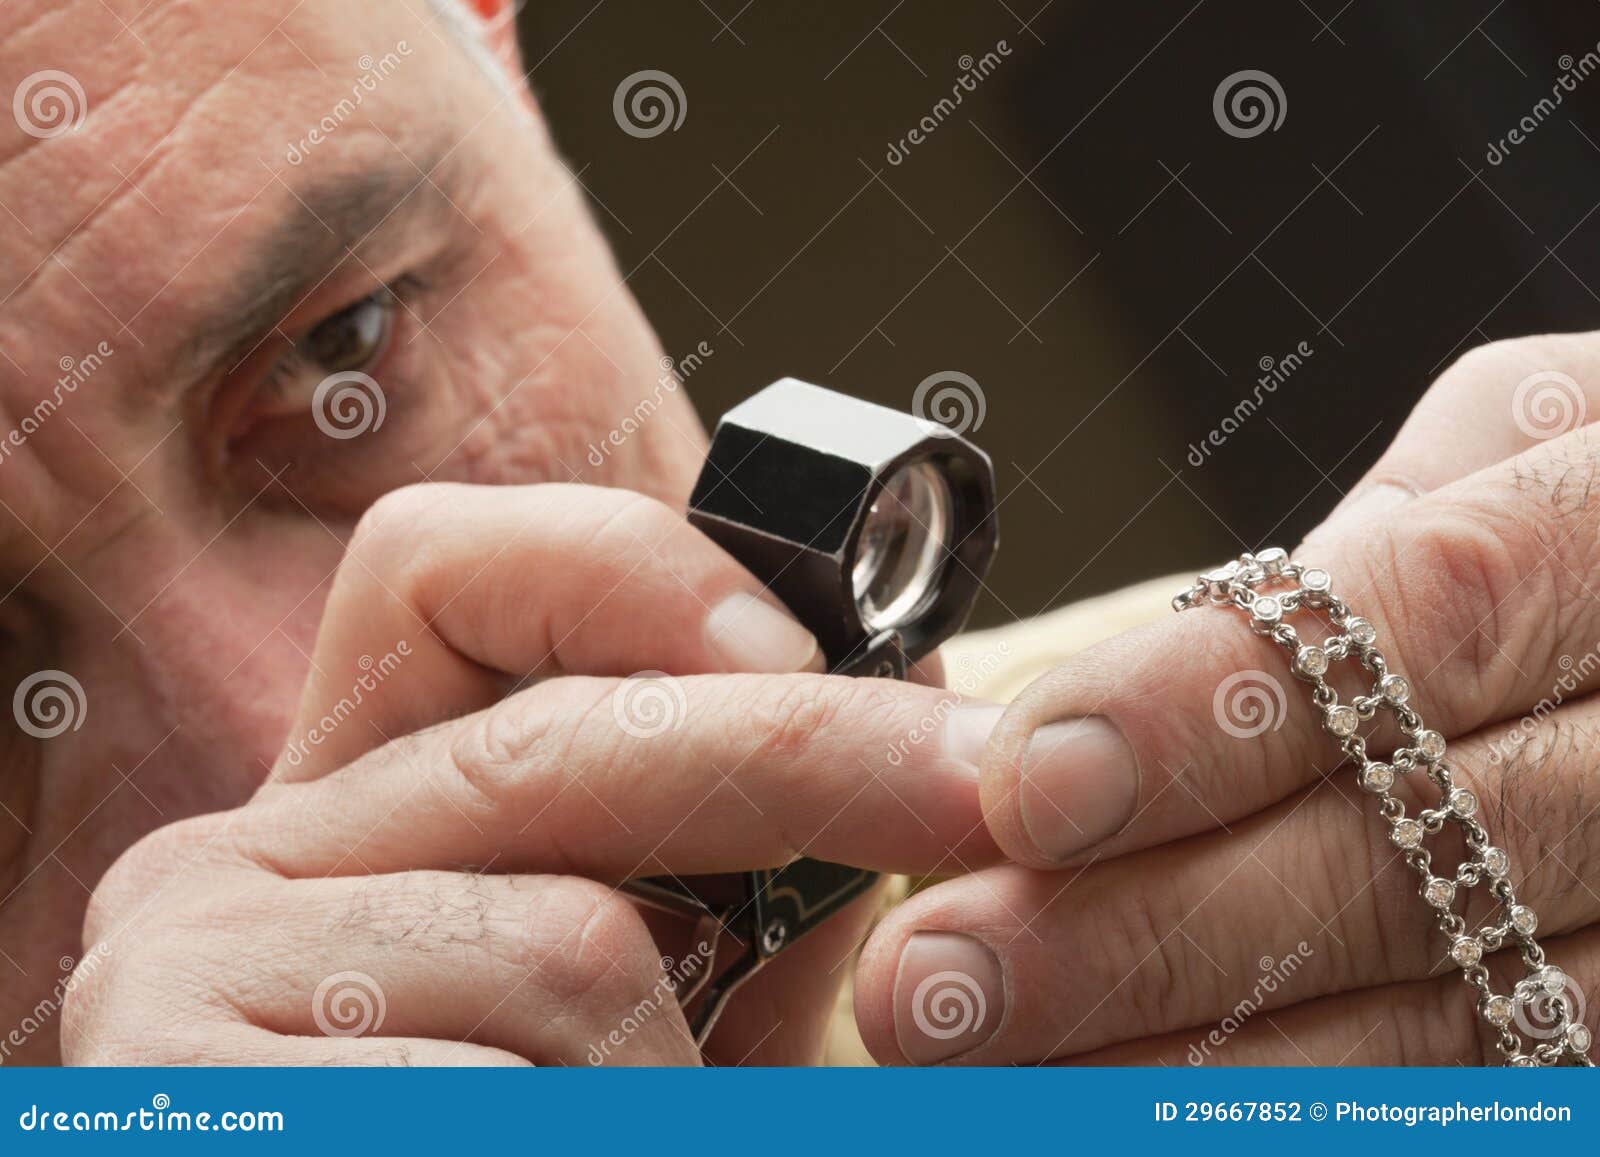 Close Up of Man Looking at Jewelry through Magnifying Glass Stock